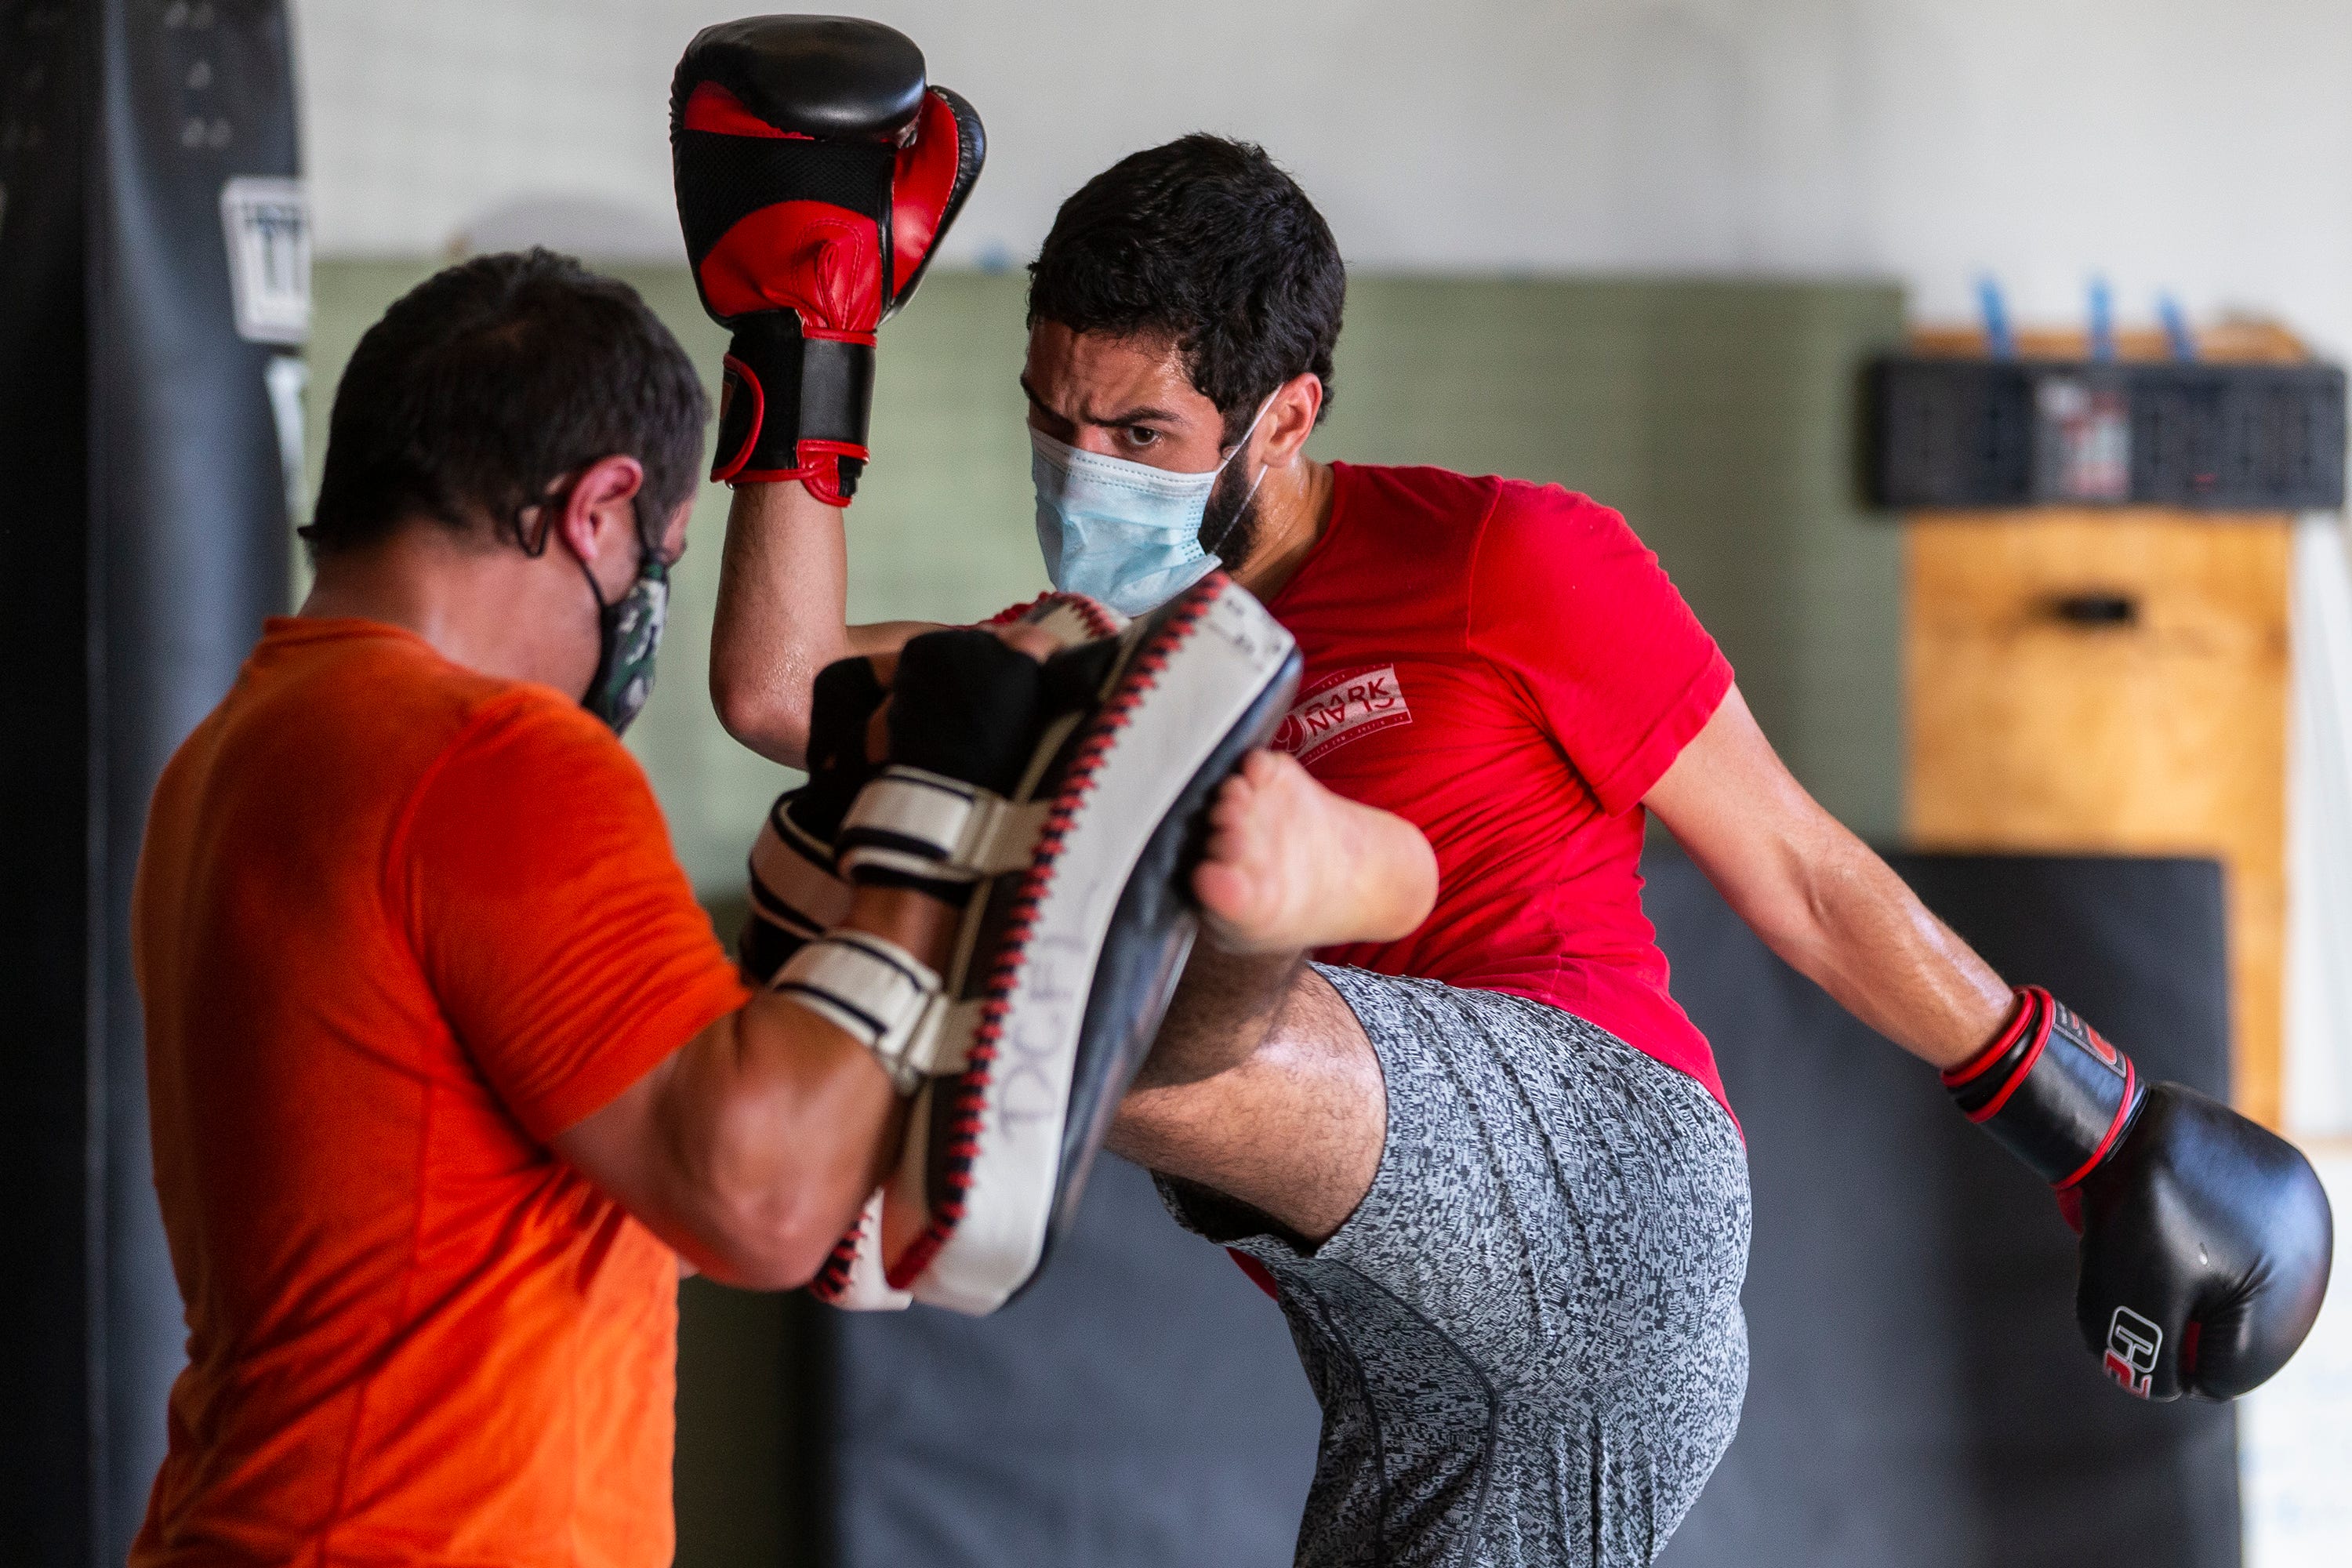 Pablo Rivera, right, works out with Mike Leboeuf during a kickboxing class at Dark Clan Fight Lab in east Austin, Wednesday, July 8, 2020. The gym was able to open Wednesday with new practices to keep their members safe due to Coronavirus.